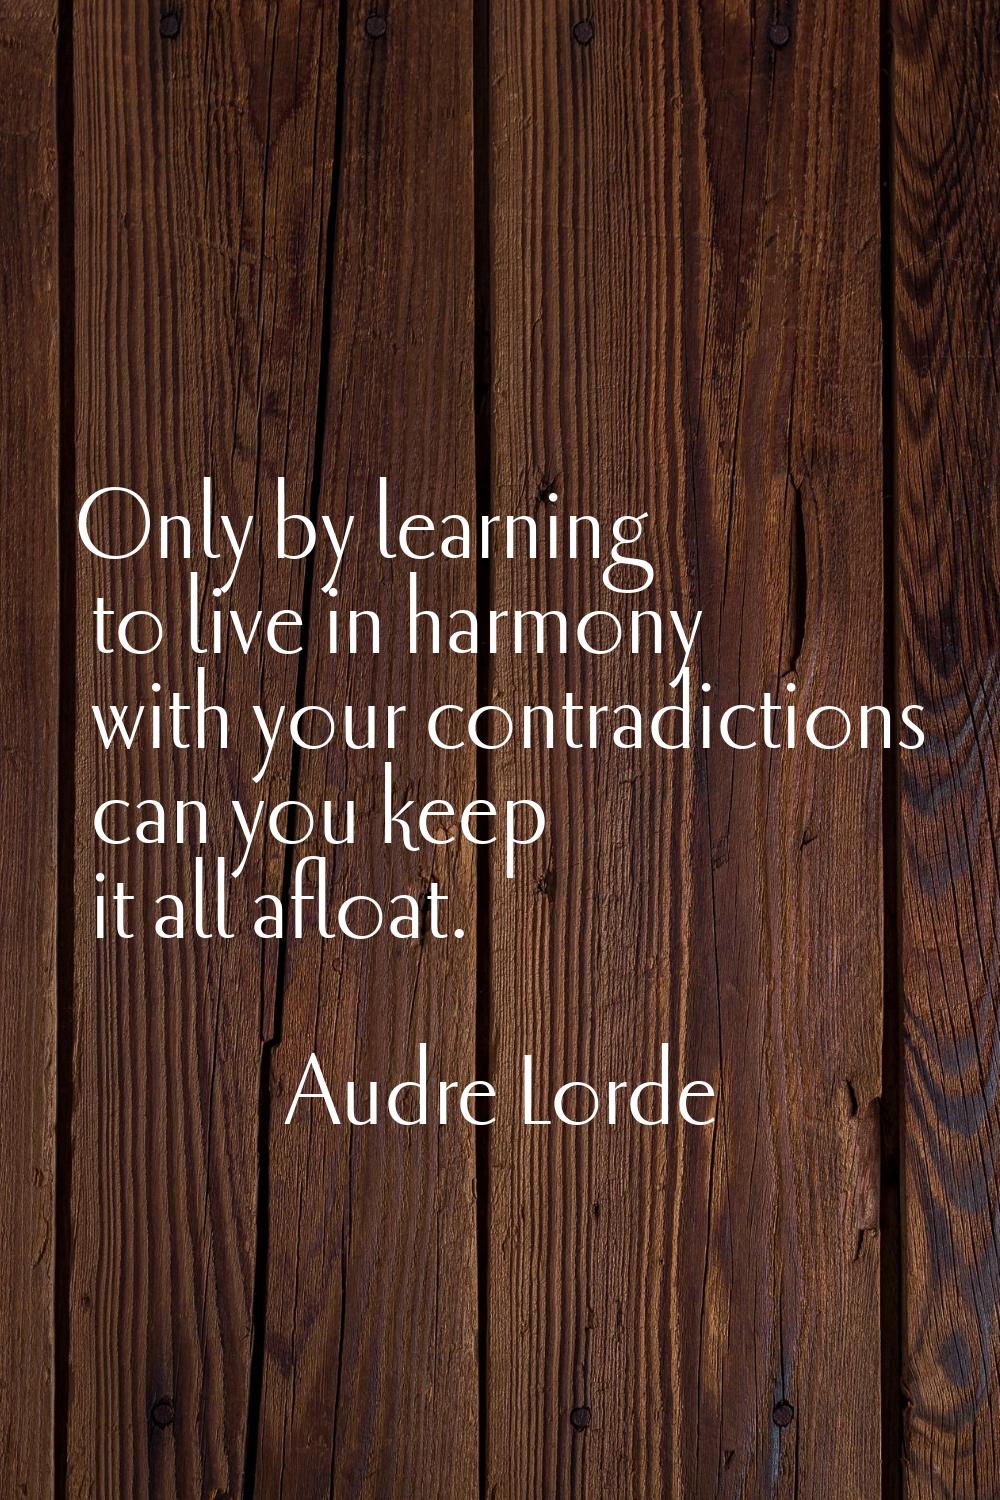 Only by learning to live in harmony with your contradictions can you keep it all afloat.